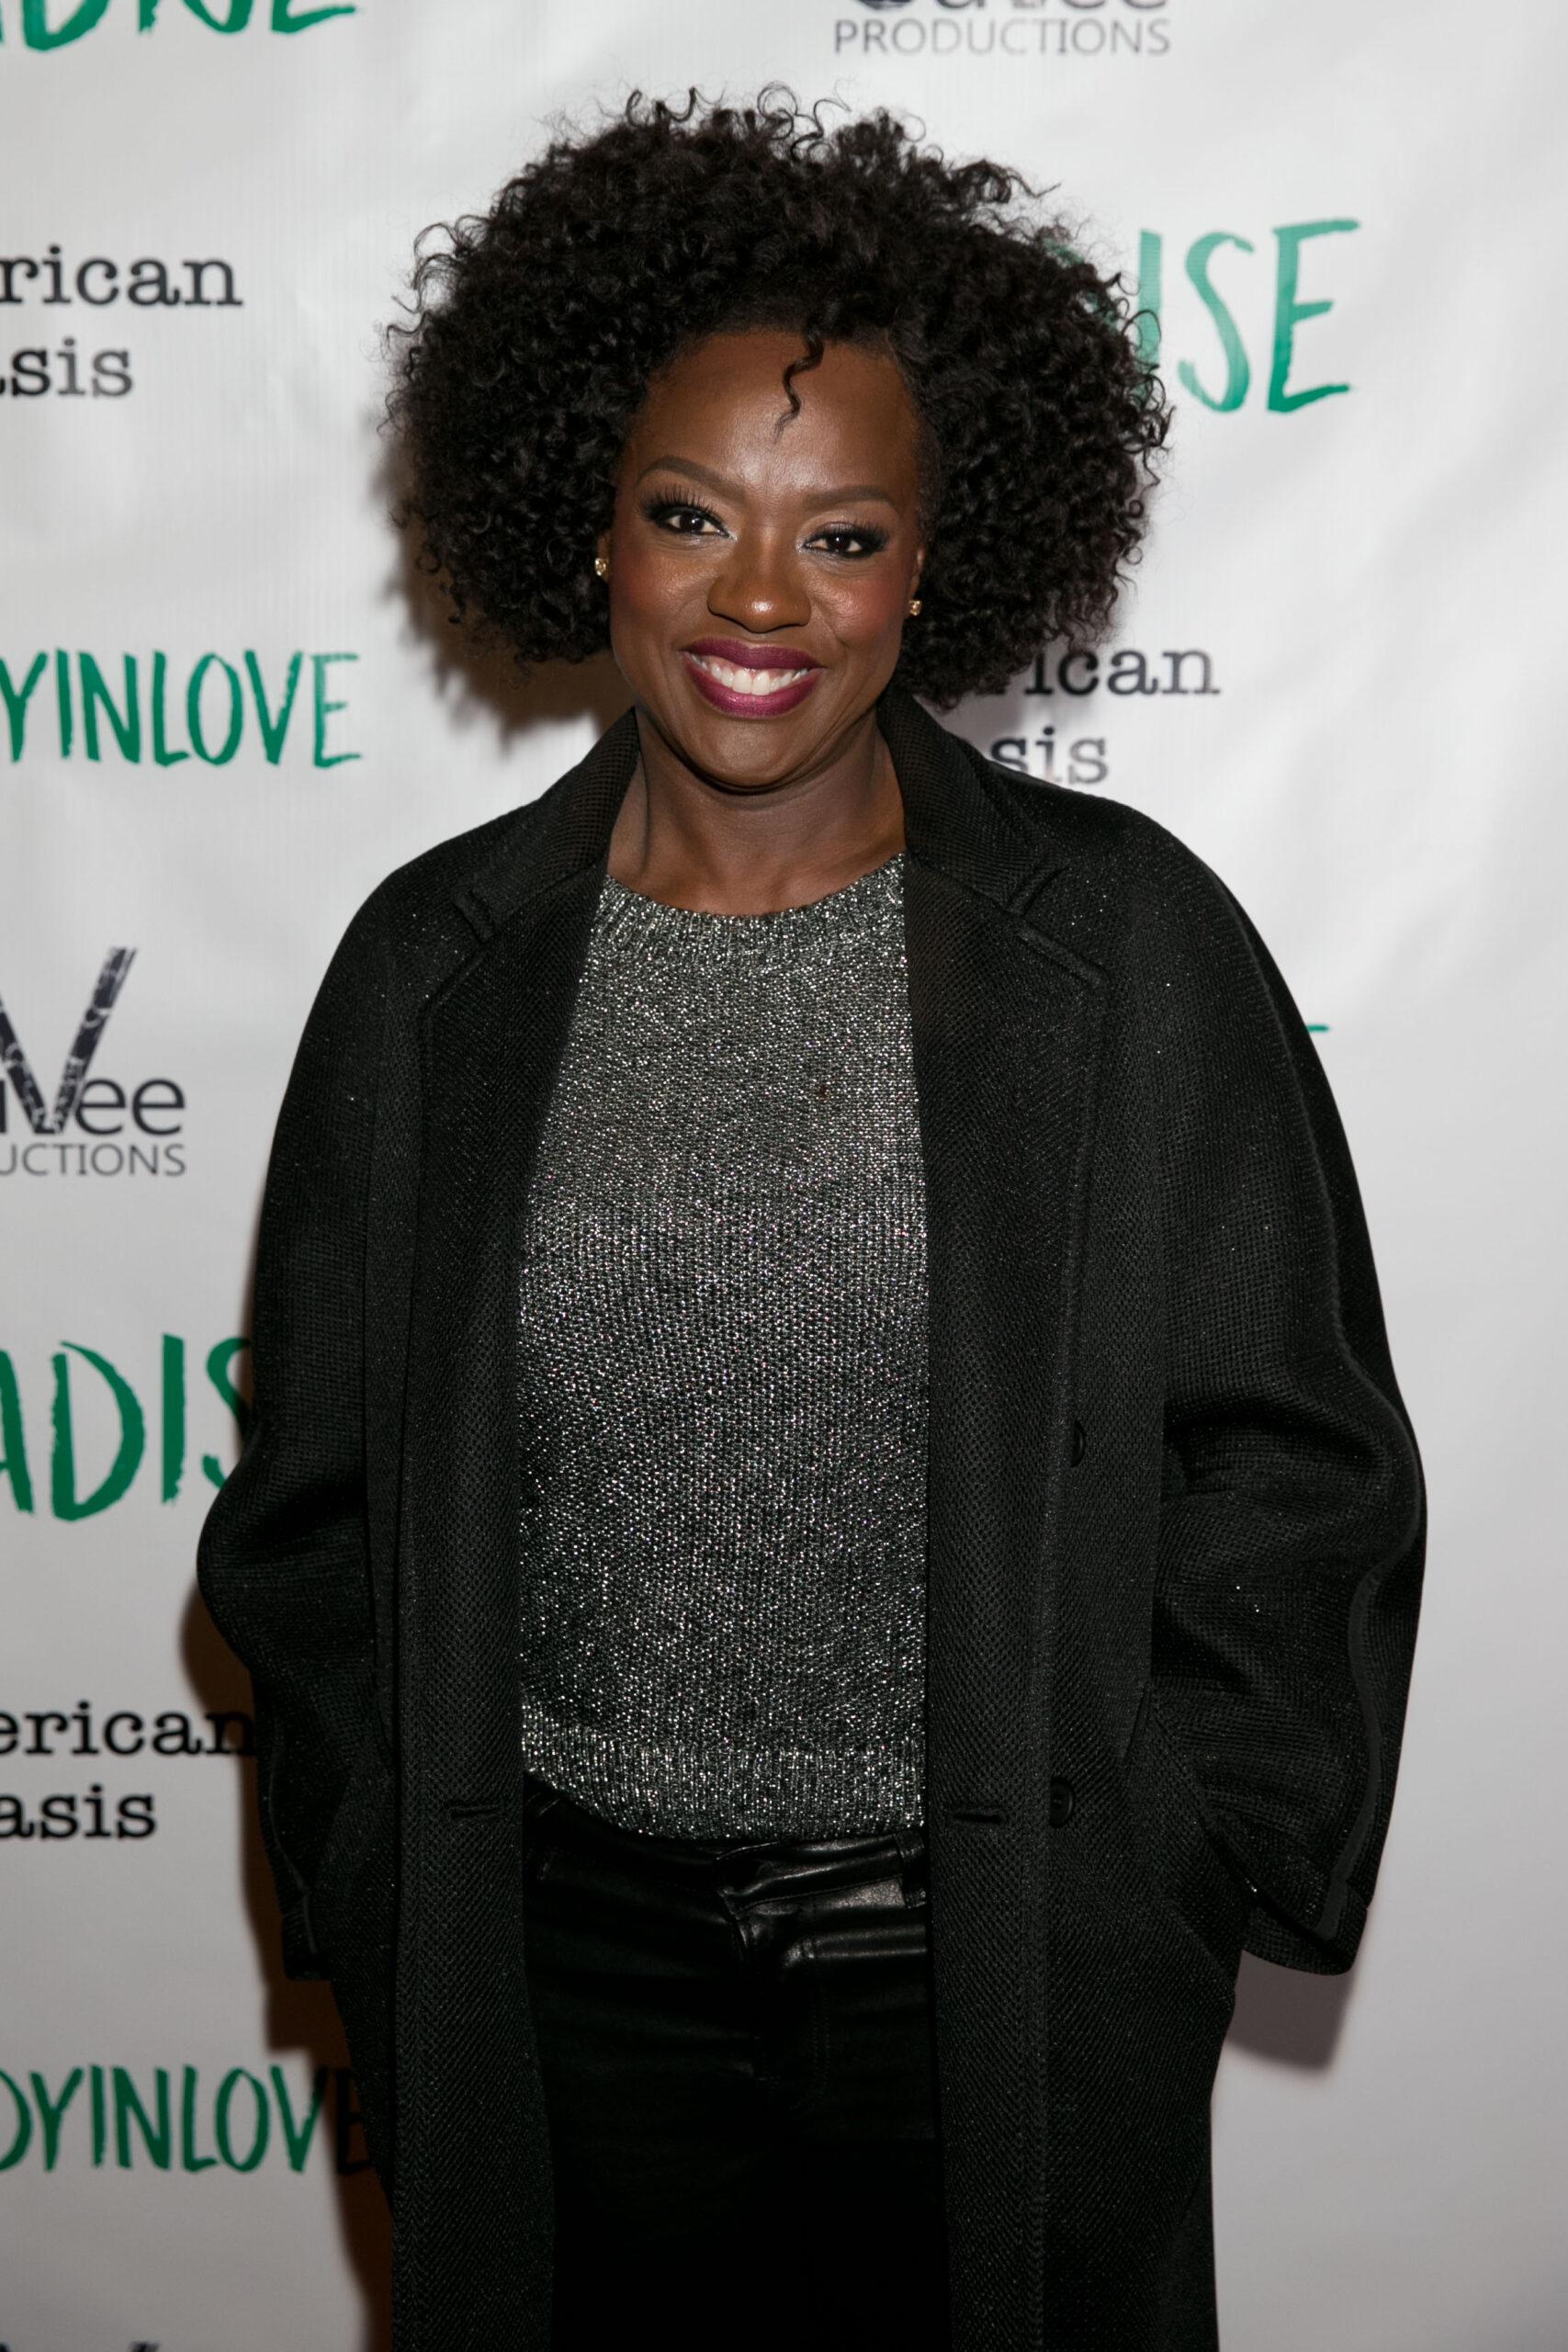 Viola Davis On Being Passed Over For Some Roles Due To Her Race